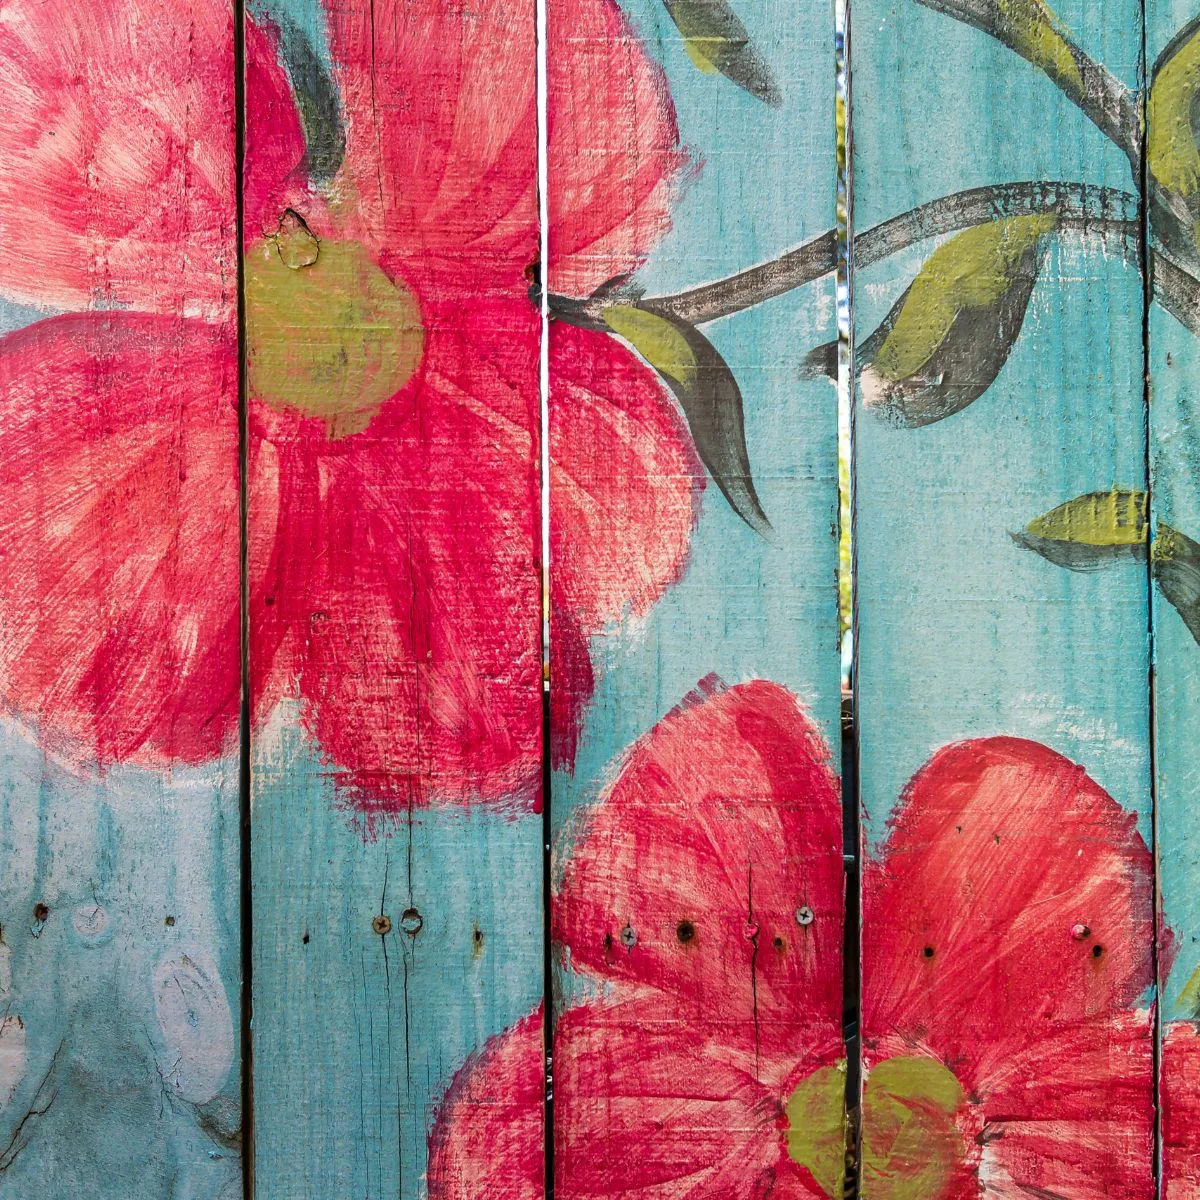 Beautiful large red flowers painted on a pastel blue fence.